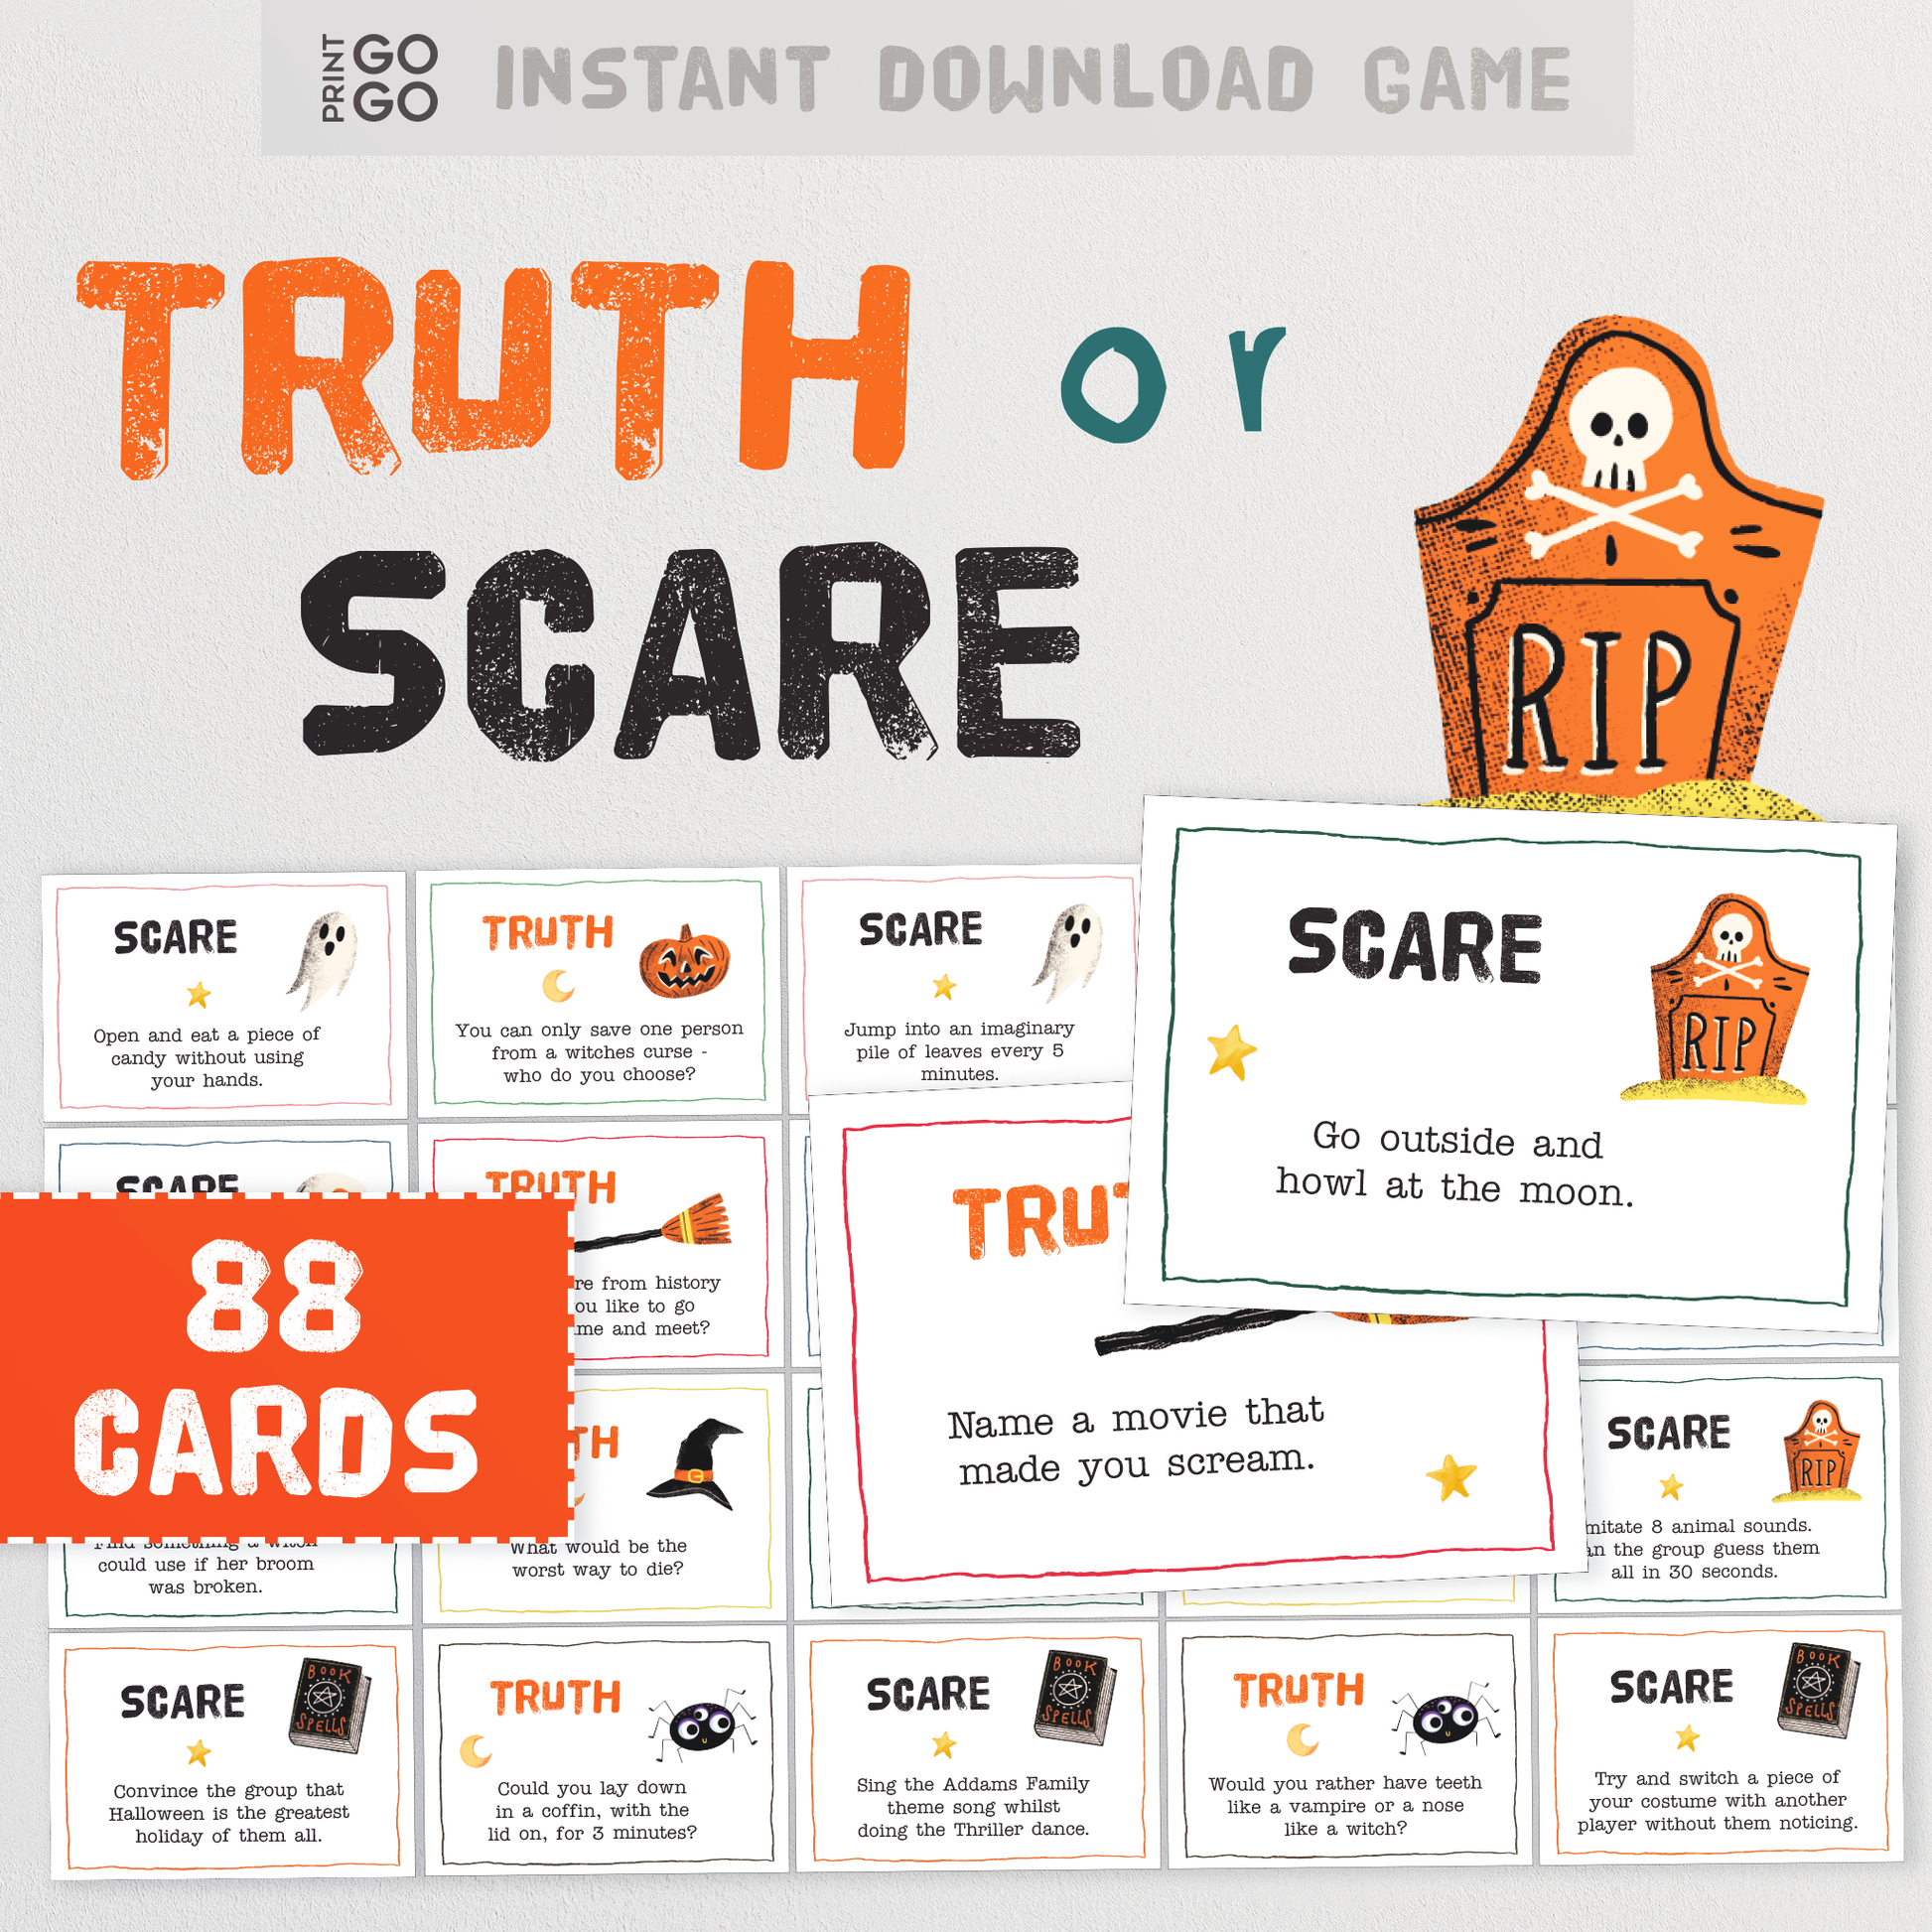 Halloween Truth or Scare Cards - The Fun Halloween Party Game for Kids!